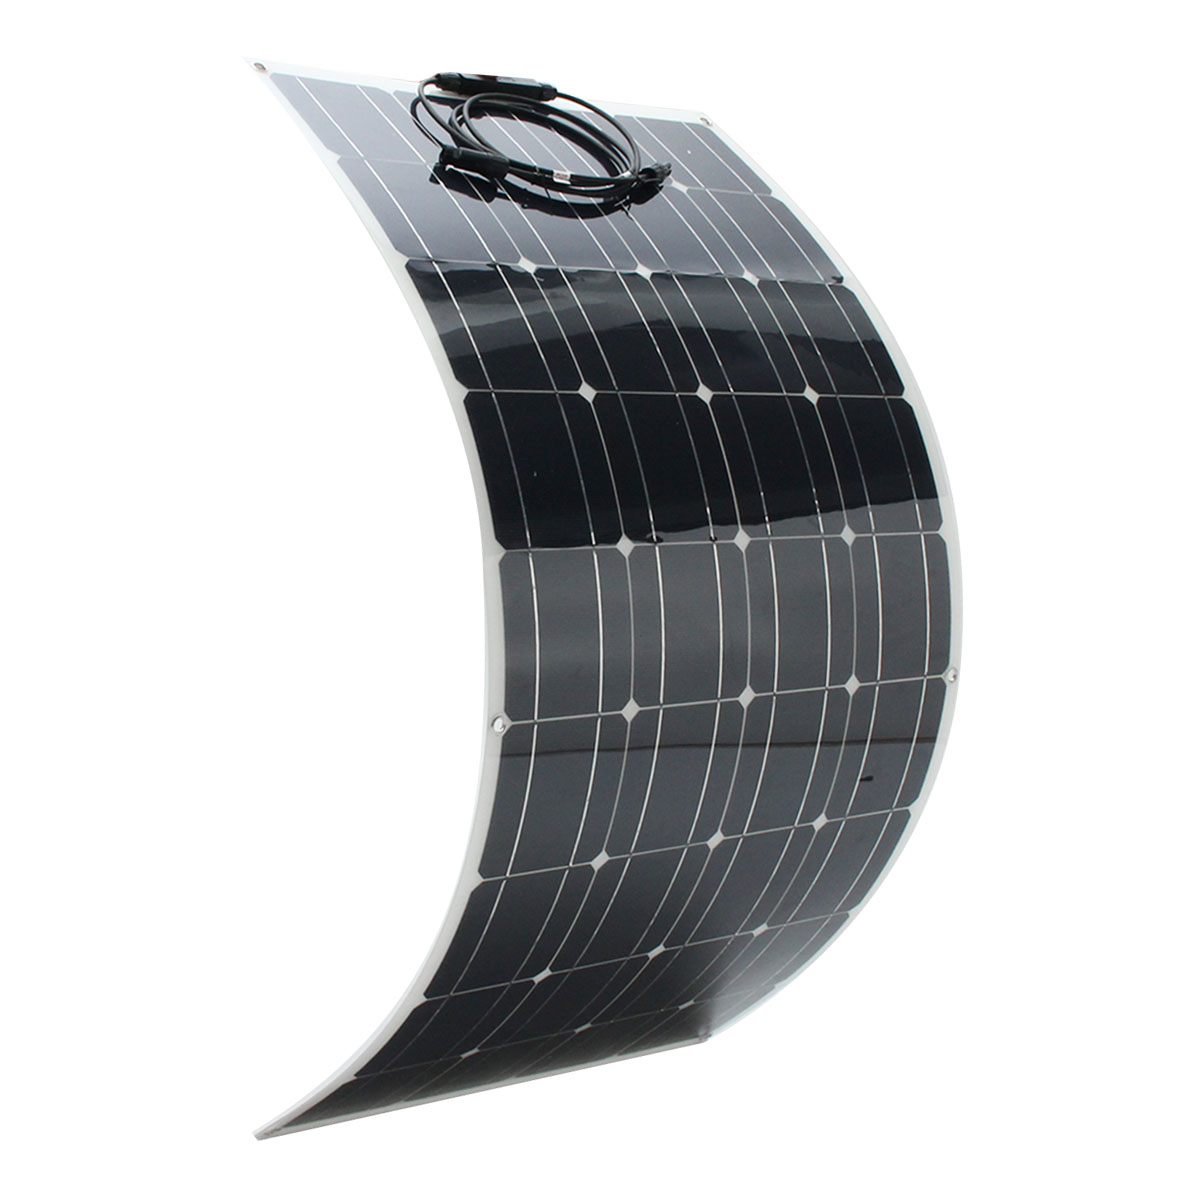 Elfeland® SP-39 120W 1180*540mm Semi-Flexible Solar Panel With 1.5m Cable Front Junction Box 12